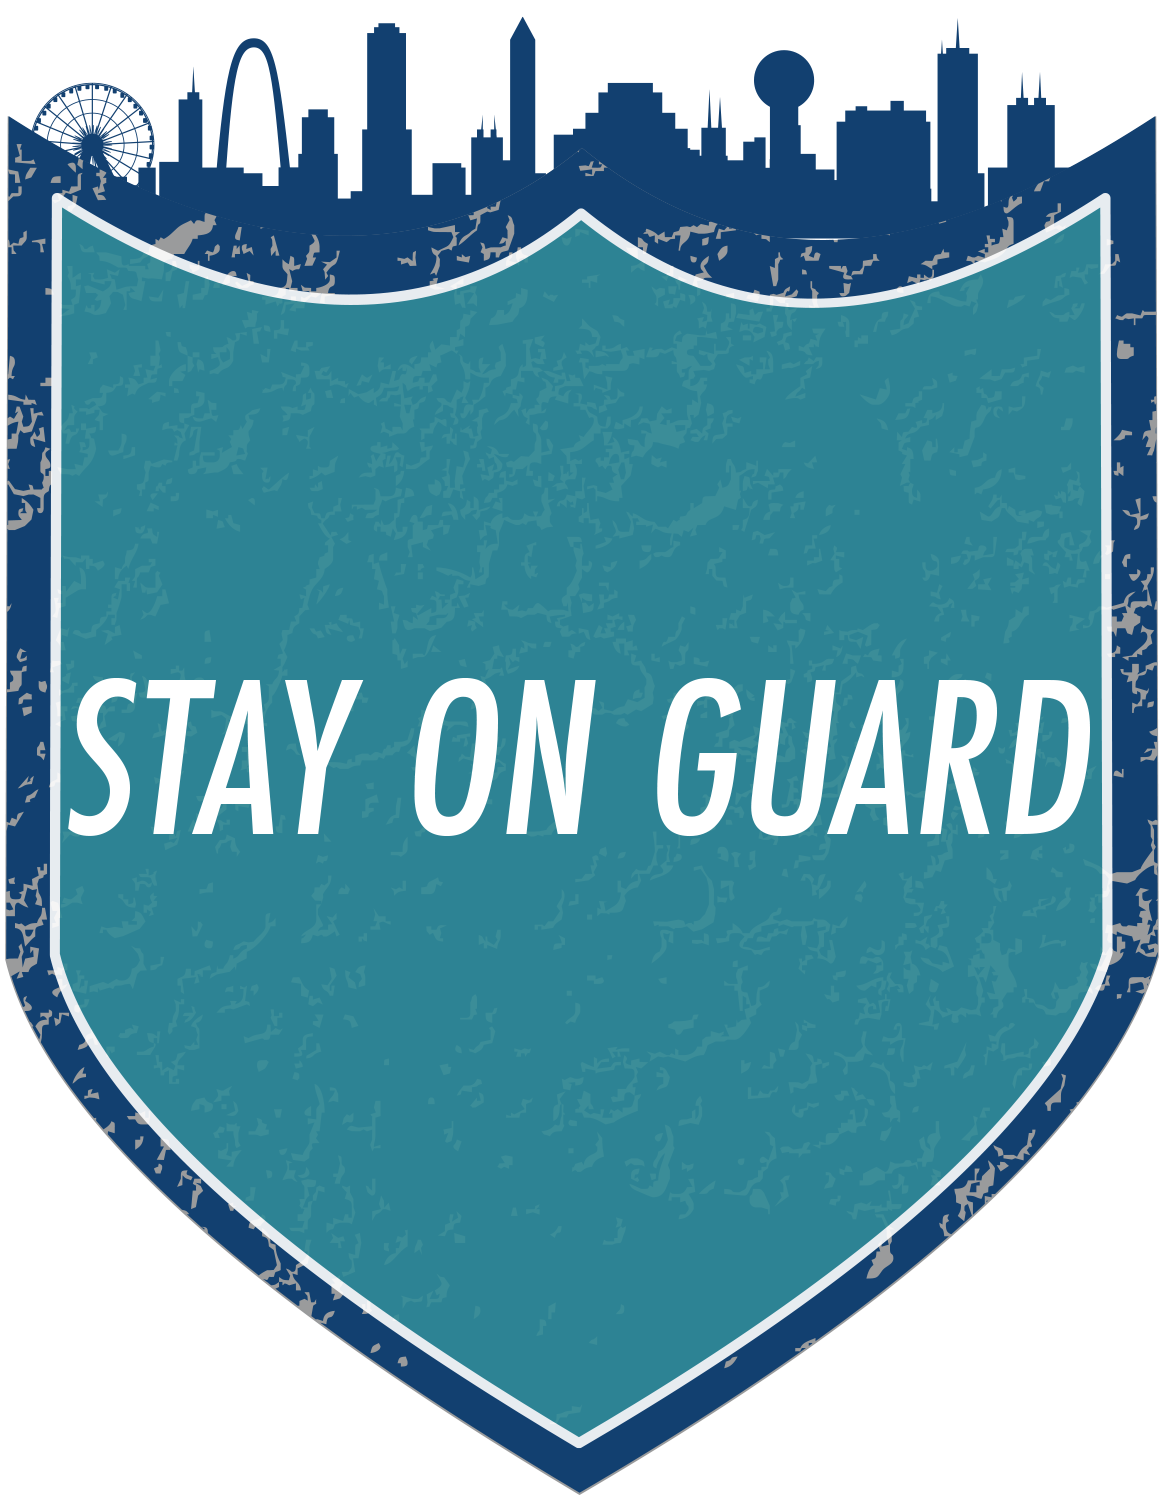 Stay on Guard Image